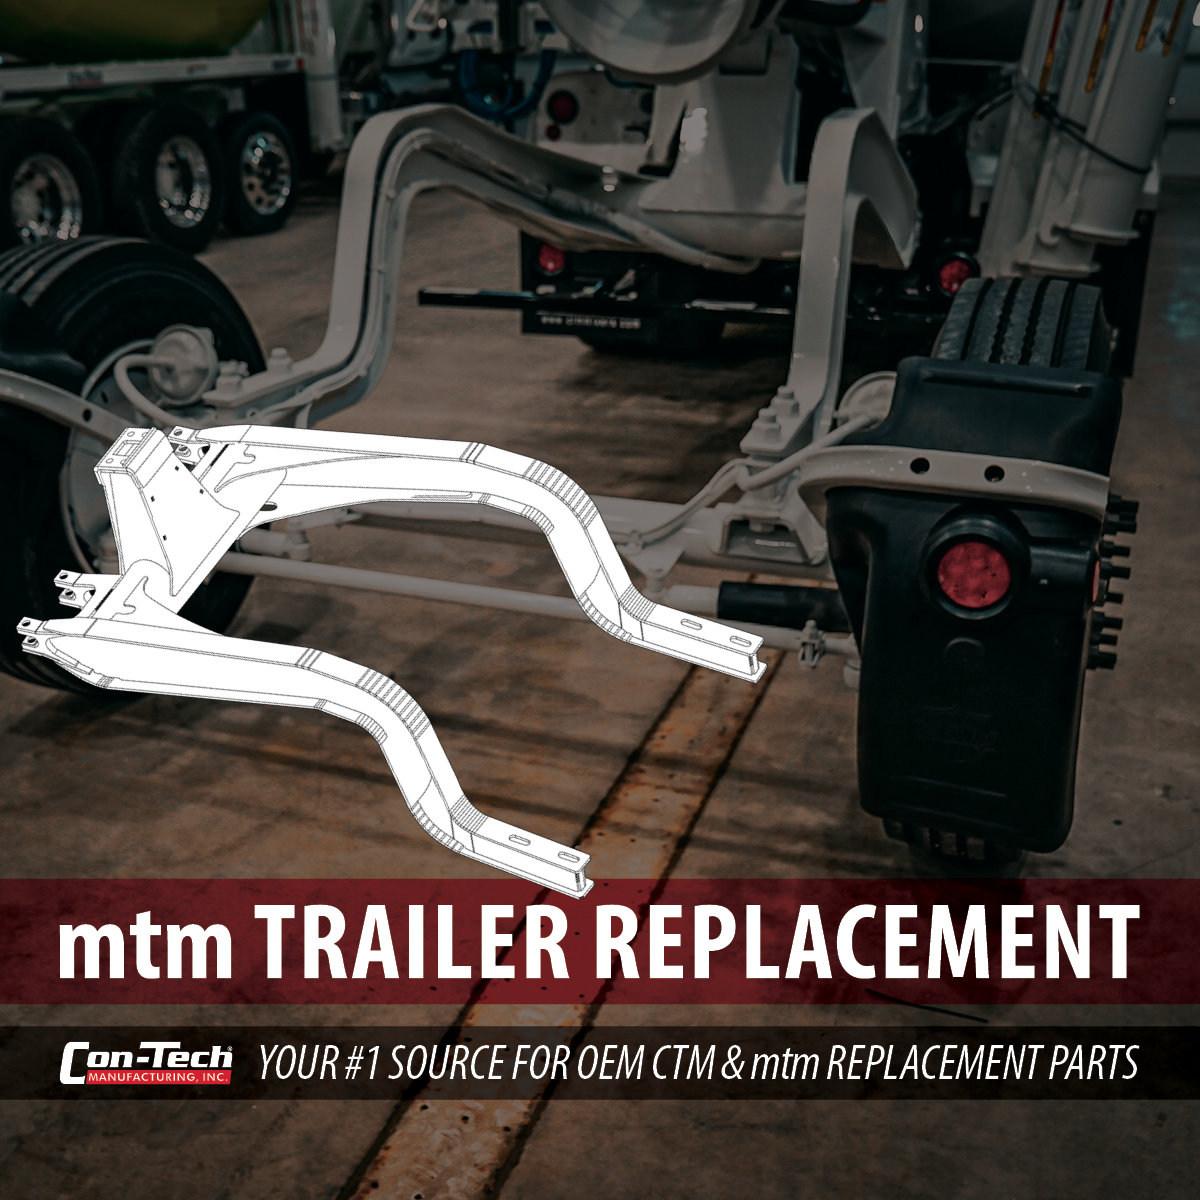 mtm Trailer Replacement from Con-Tech Parts